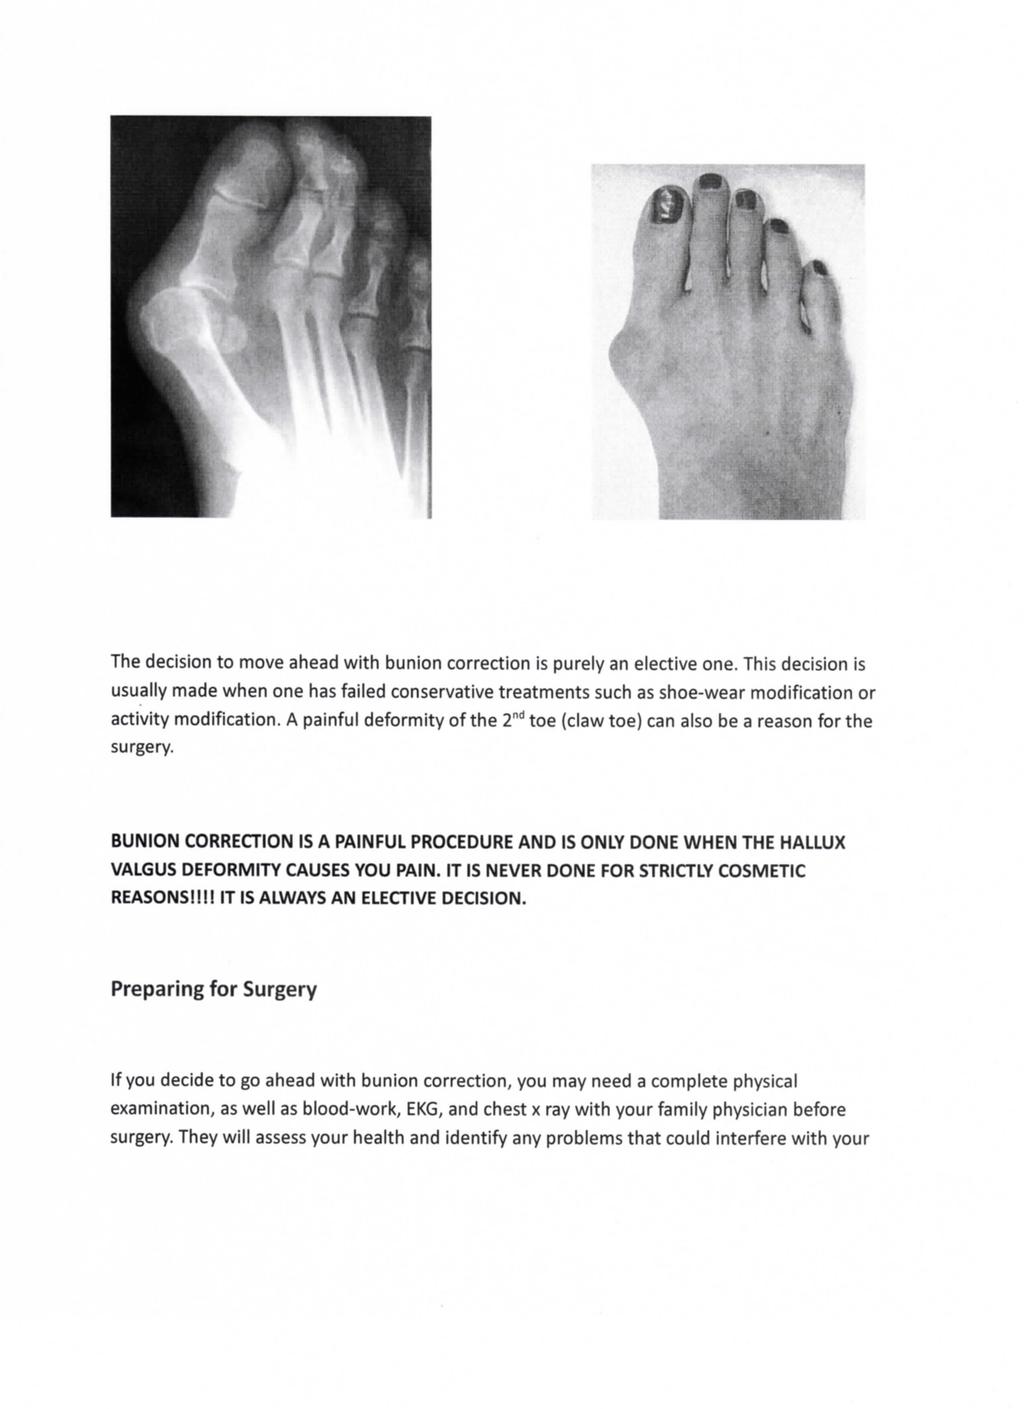 The decision to move ahead with bunion correction is purely an elective one.